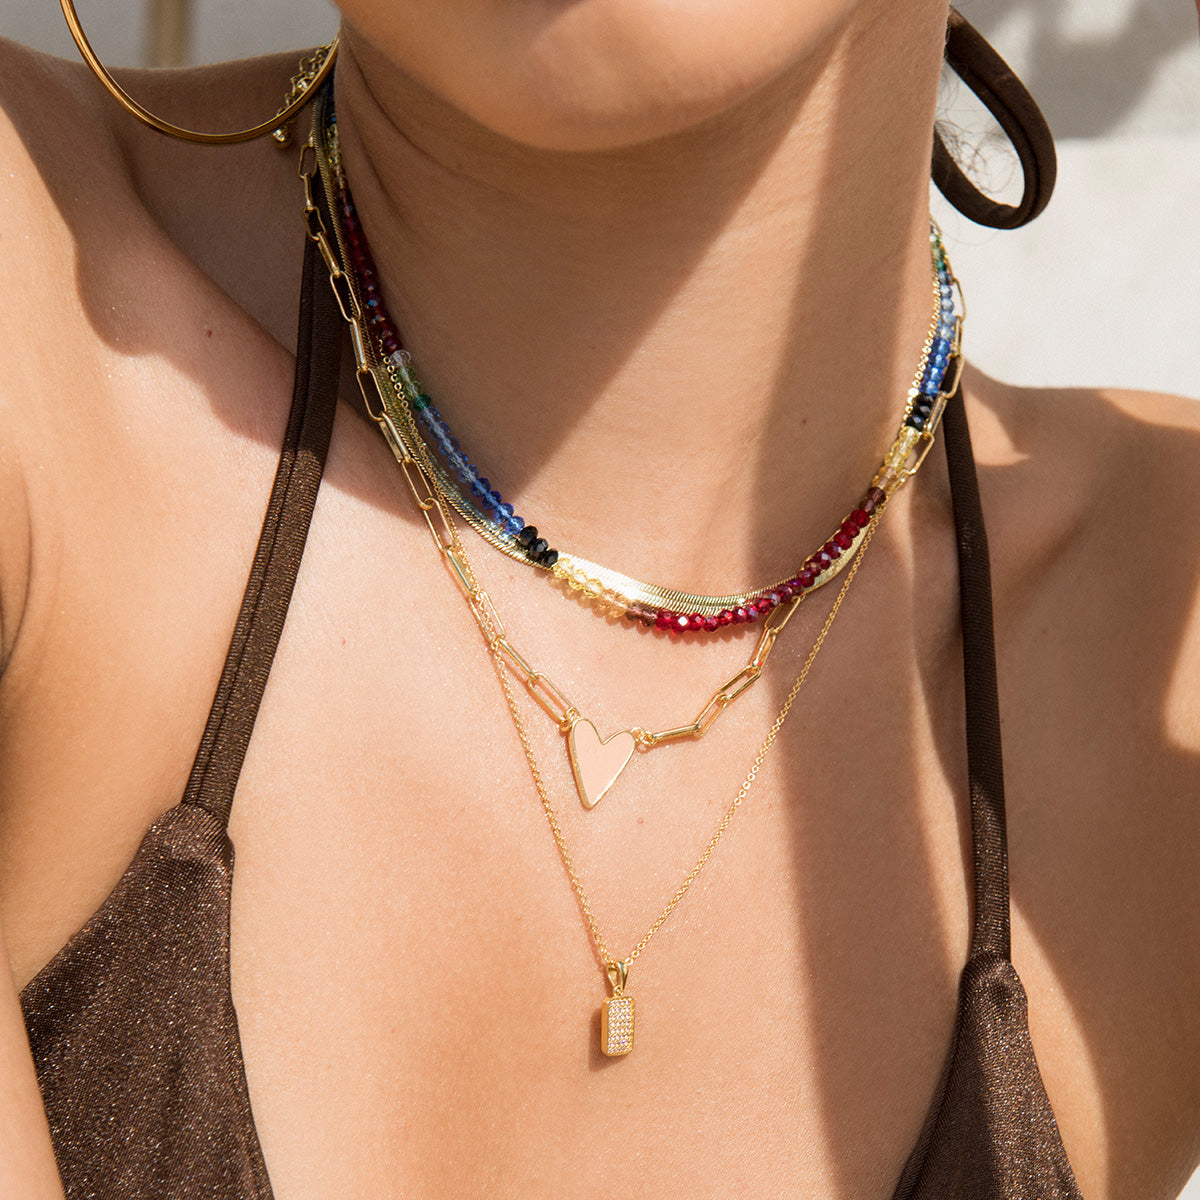 Shiner Necklace | Gold | Model Image | Uncommon James